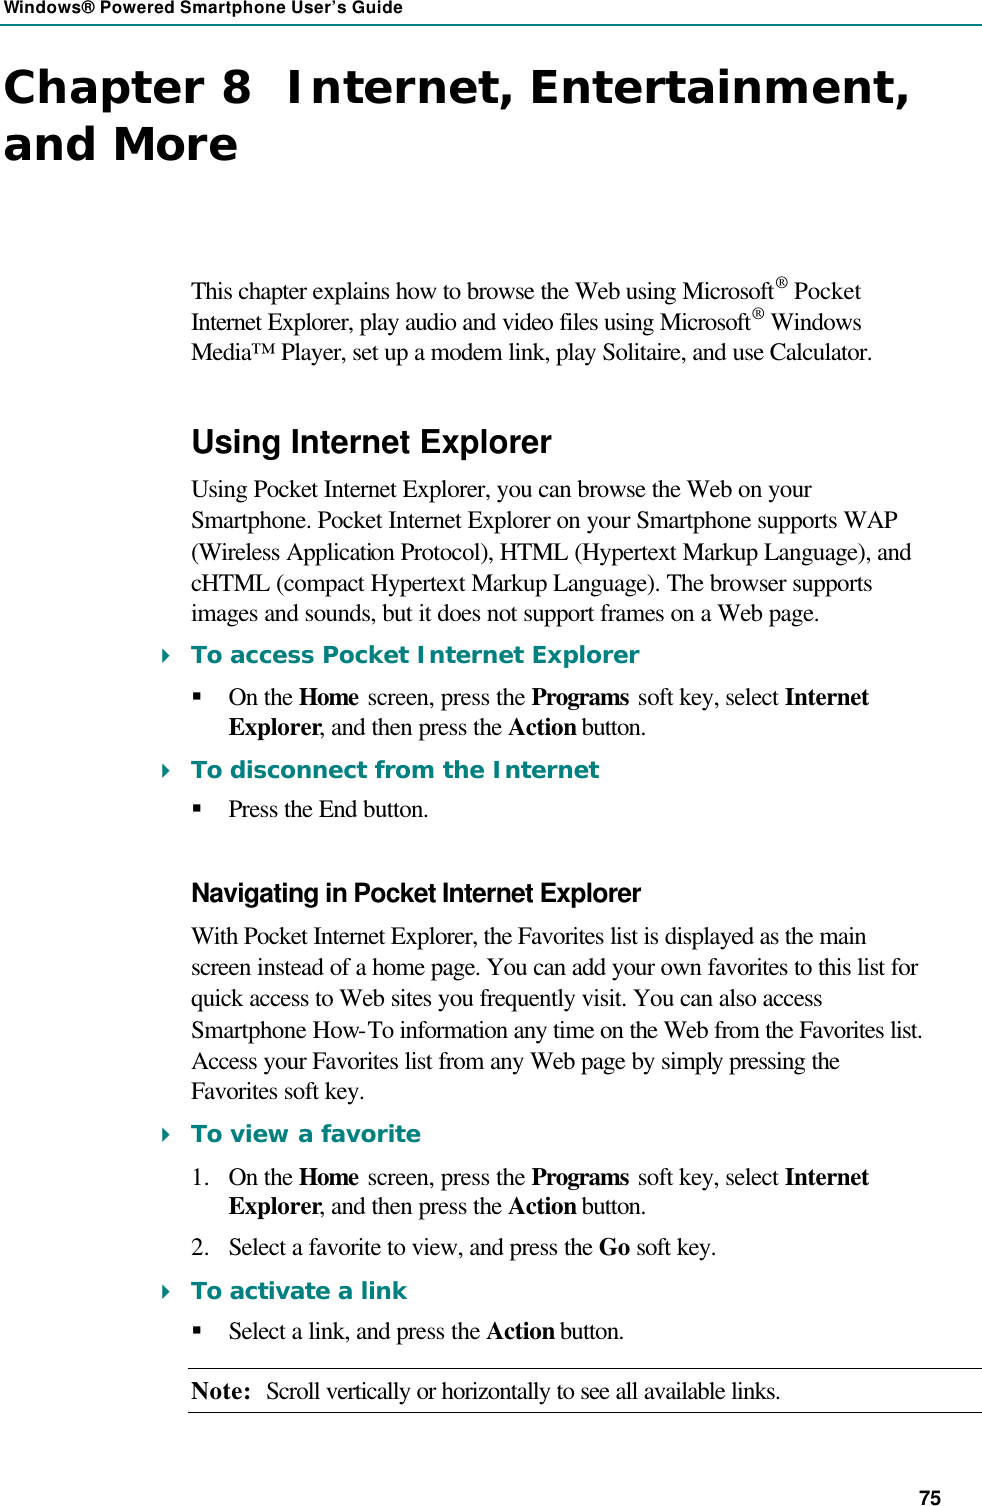 Windows® Powered Smartphone User’s Guide 75 Chapter 8  Internet, Entertainment, and More This chapter explains how to browse the Web using Microsoft® Pocket Internet Explorer, play audio and video files using Microsoft® Windows Media™ Player, set up a modem link, play Solitaire, and use Calculator. Using Internet Explorer Using Pocket Internet Explorer, you can browse the Web on your Smartphone. Pocket Internet Explorer on your Smartphone supports WAP (Wireless Application Protocol), HTML (Hypertext Markup Language), and cHTML (compact Hypertext Markup Language). The browser supports images and sounds, but it does not support frames on a Web page. 4 To access Pocket Internet Explorer § On the Home screen, press the Programs soft key, select Internet Explorer, and then press the Action button. 4 To disconnect from the Internet § Press the End button. Navigating in Pocket Internet Explorer With Pocket Internet Explorer, the Favorites list is displayed as the main screen instead of a home page. You can add your own favorites to this list for quick access to Web sites you frequently visit. You can also access Smartphone How-To information any time on the Web from the Favorites list. Access your Favorites list from any Web page by simply pressing the Favorites soft key. 4 To view a favorite 1.  On the Home screen, press the Programs soft key, select Internet Explorer, and then press the Action button. 2.  Select a favorite to view, and press the Go soft key. 4 To activate a link § Select a link, and press the Action button. Note: Scroll vertically or horizontally to see all available links. 